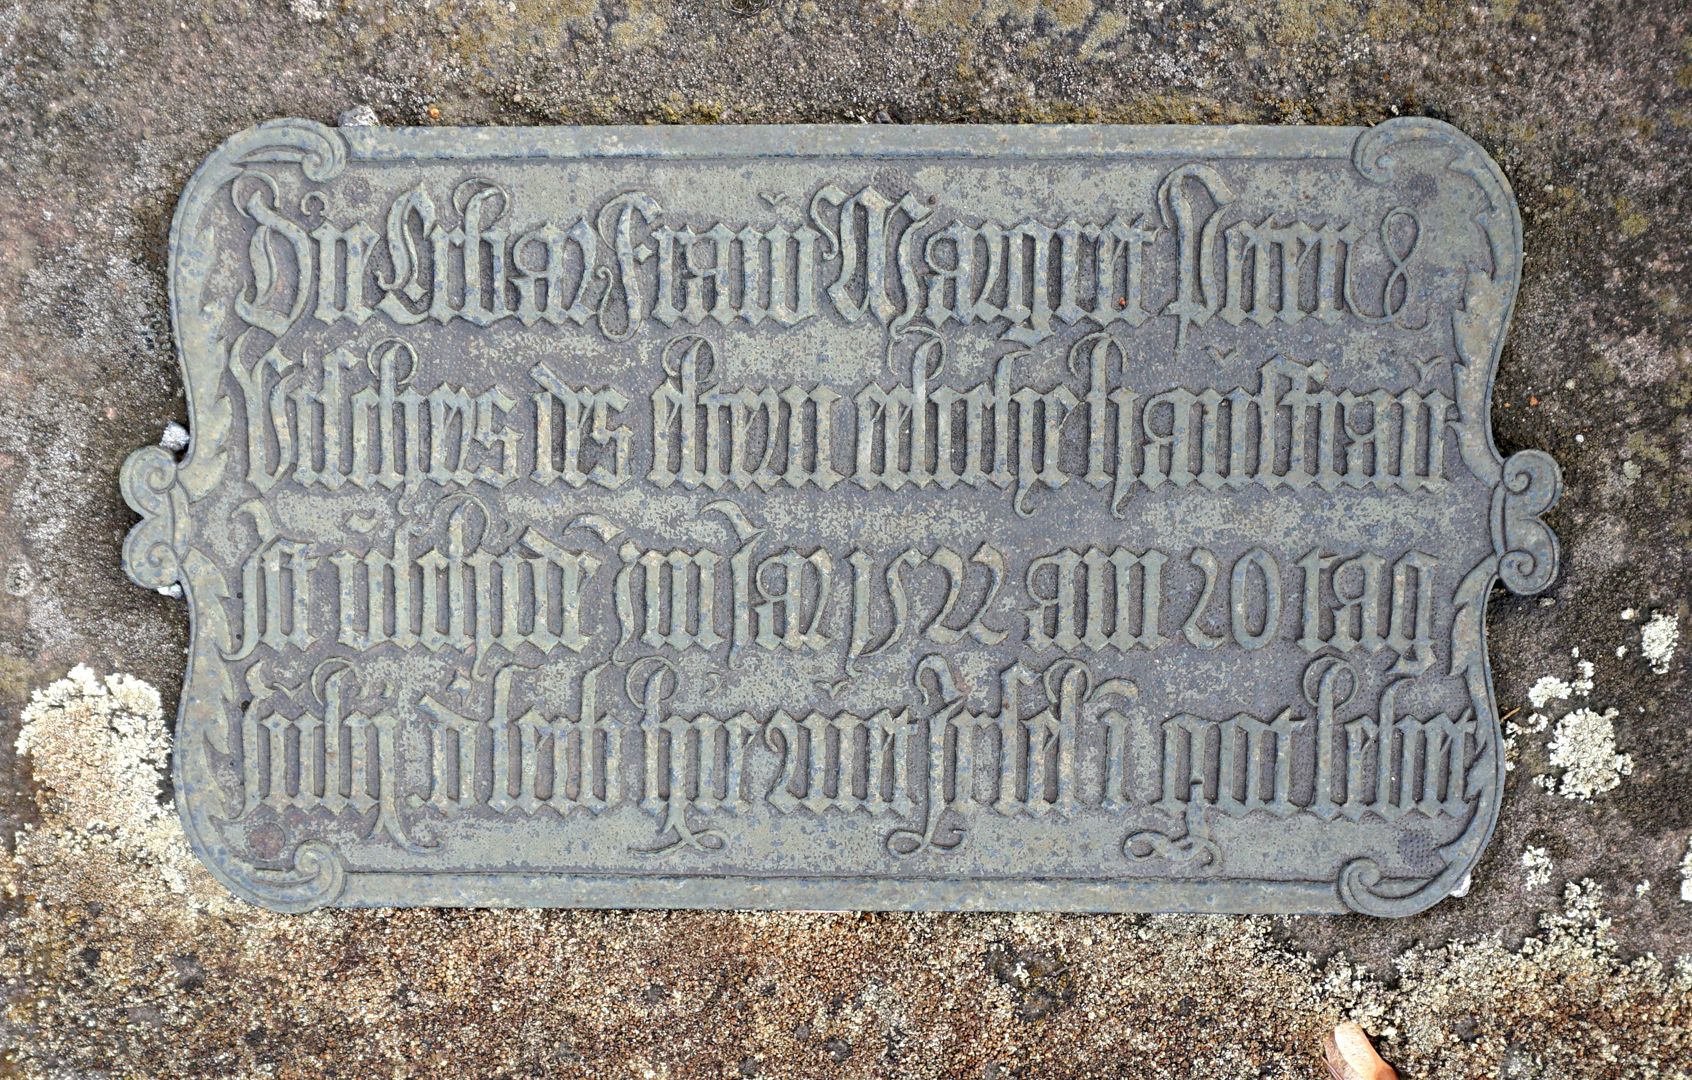 Peter Vischer gravesite Inscription: "The honourable Margret ,Peter Vischer the Elder`s legitimate housewife died in the year 1522 on the 20th day of July, her body resting here.